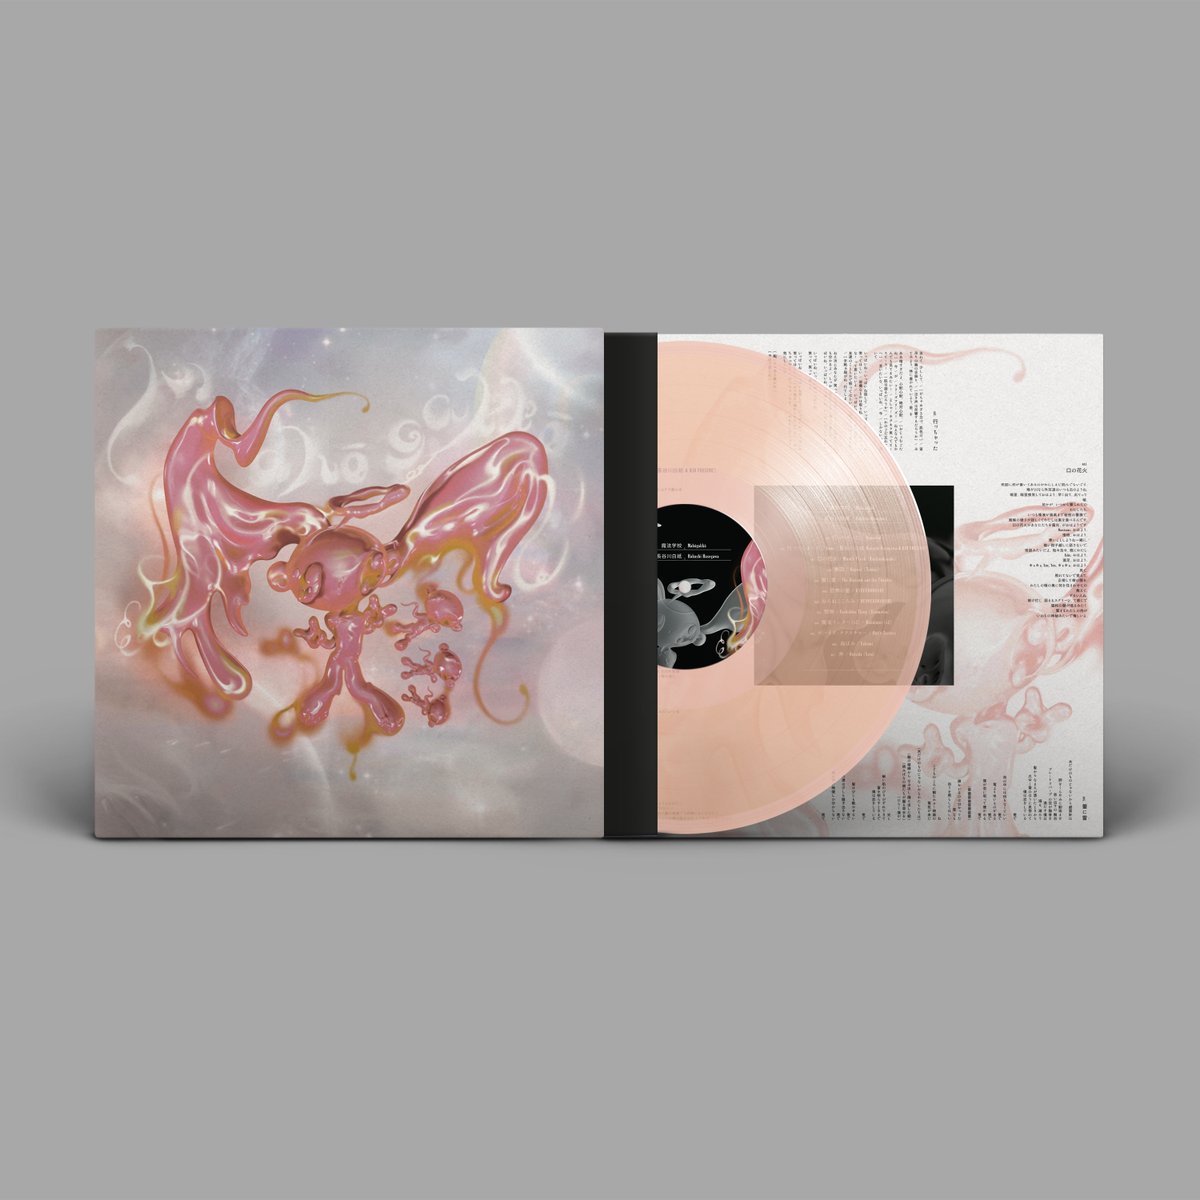 PRE-ORDER: 'Mahōgakkō' by Hakushi Hasegawa Frantic percussive pop meets fluid electronic jazz on the third from the Japanese producer and multi-instrumentalist. Translucent rosé pink vinyl LP on Brainfeeder. @hsgwhks @BRAINFEEDER normanrecords.com/records/203317…